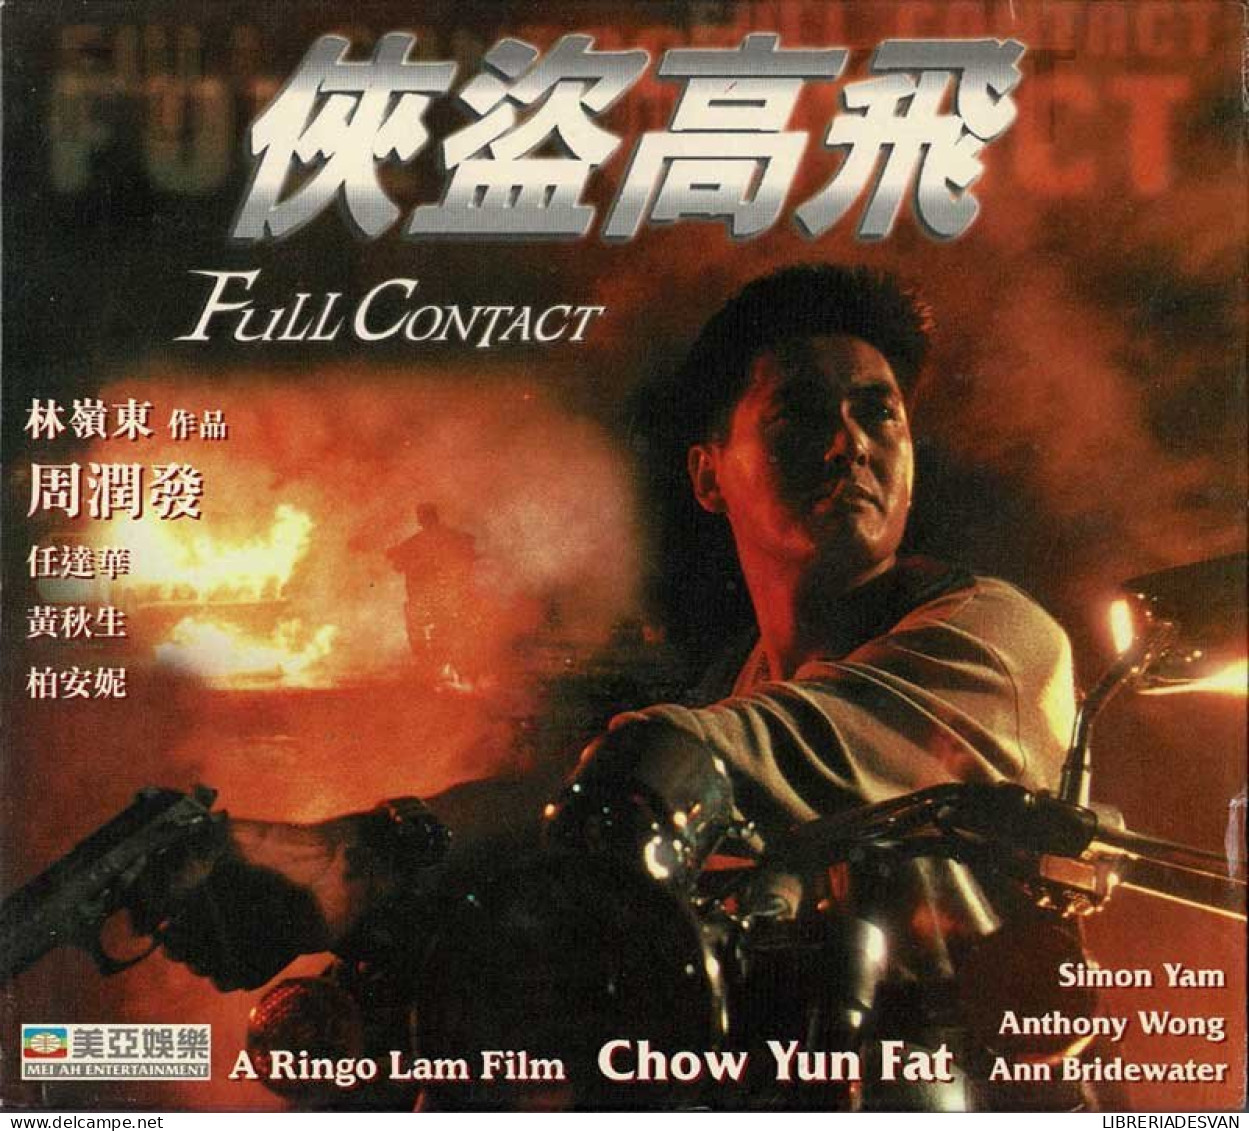 Full Contact. Edición China. 2 X VCD - Sonstige Formate